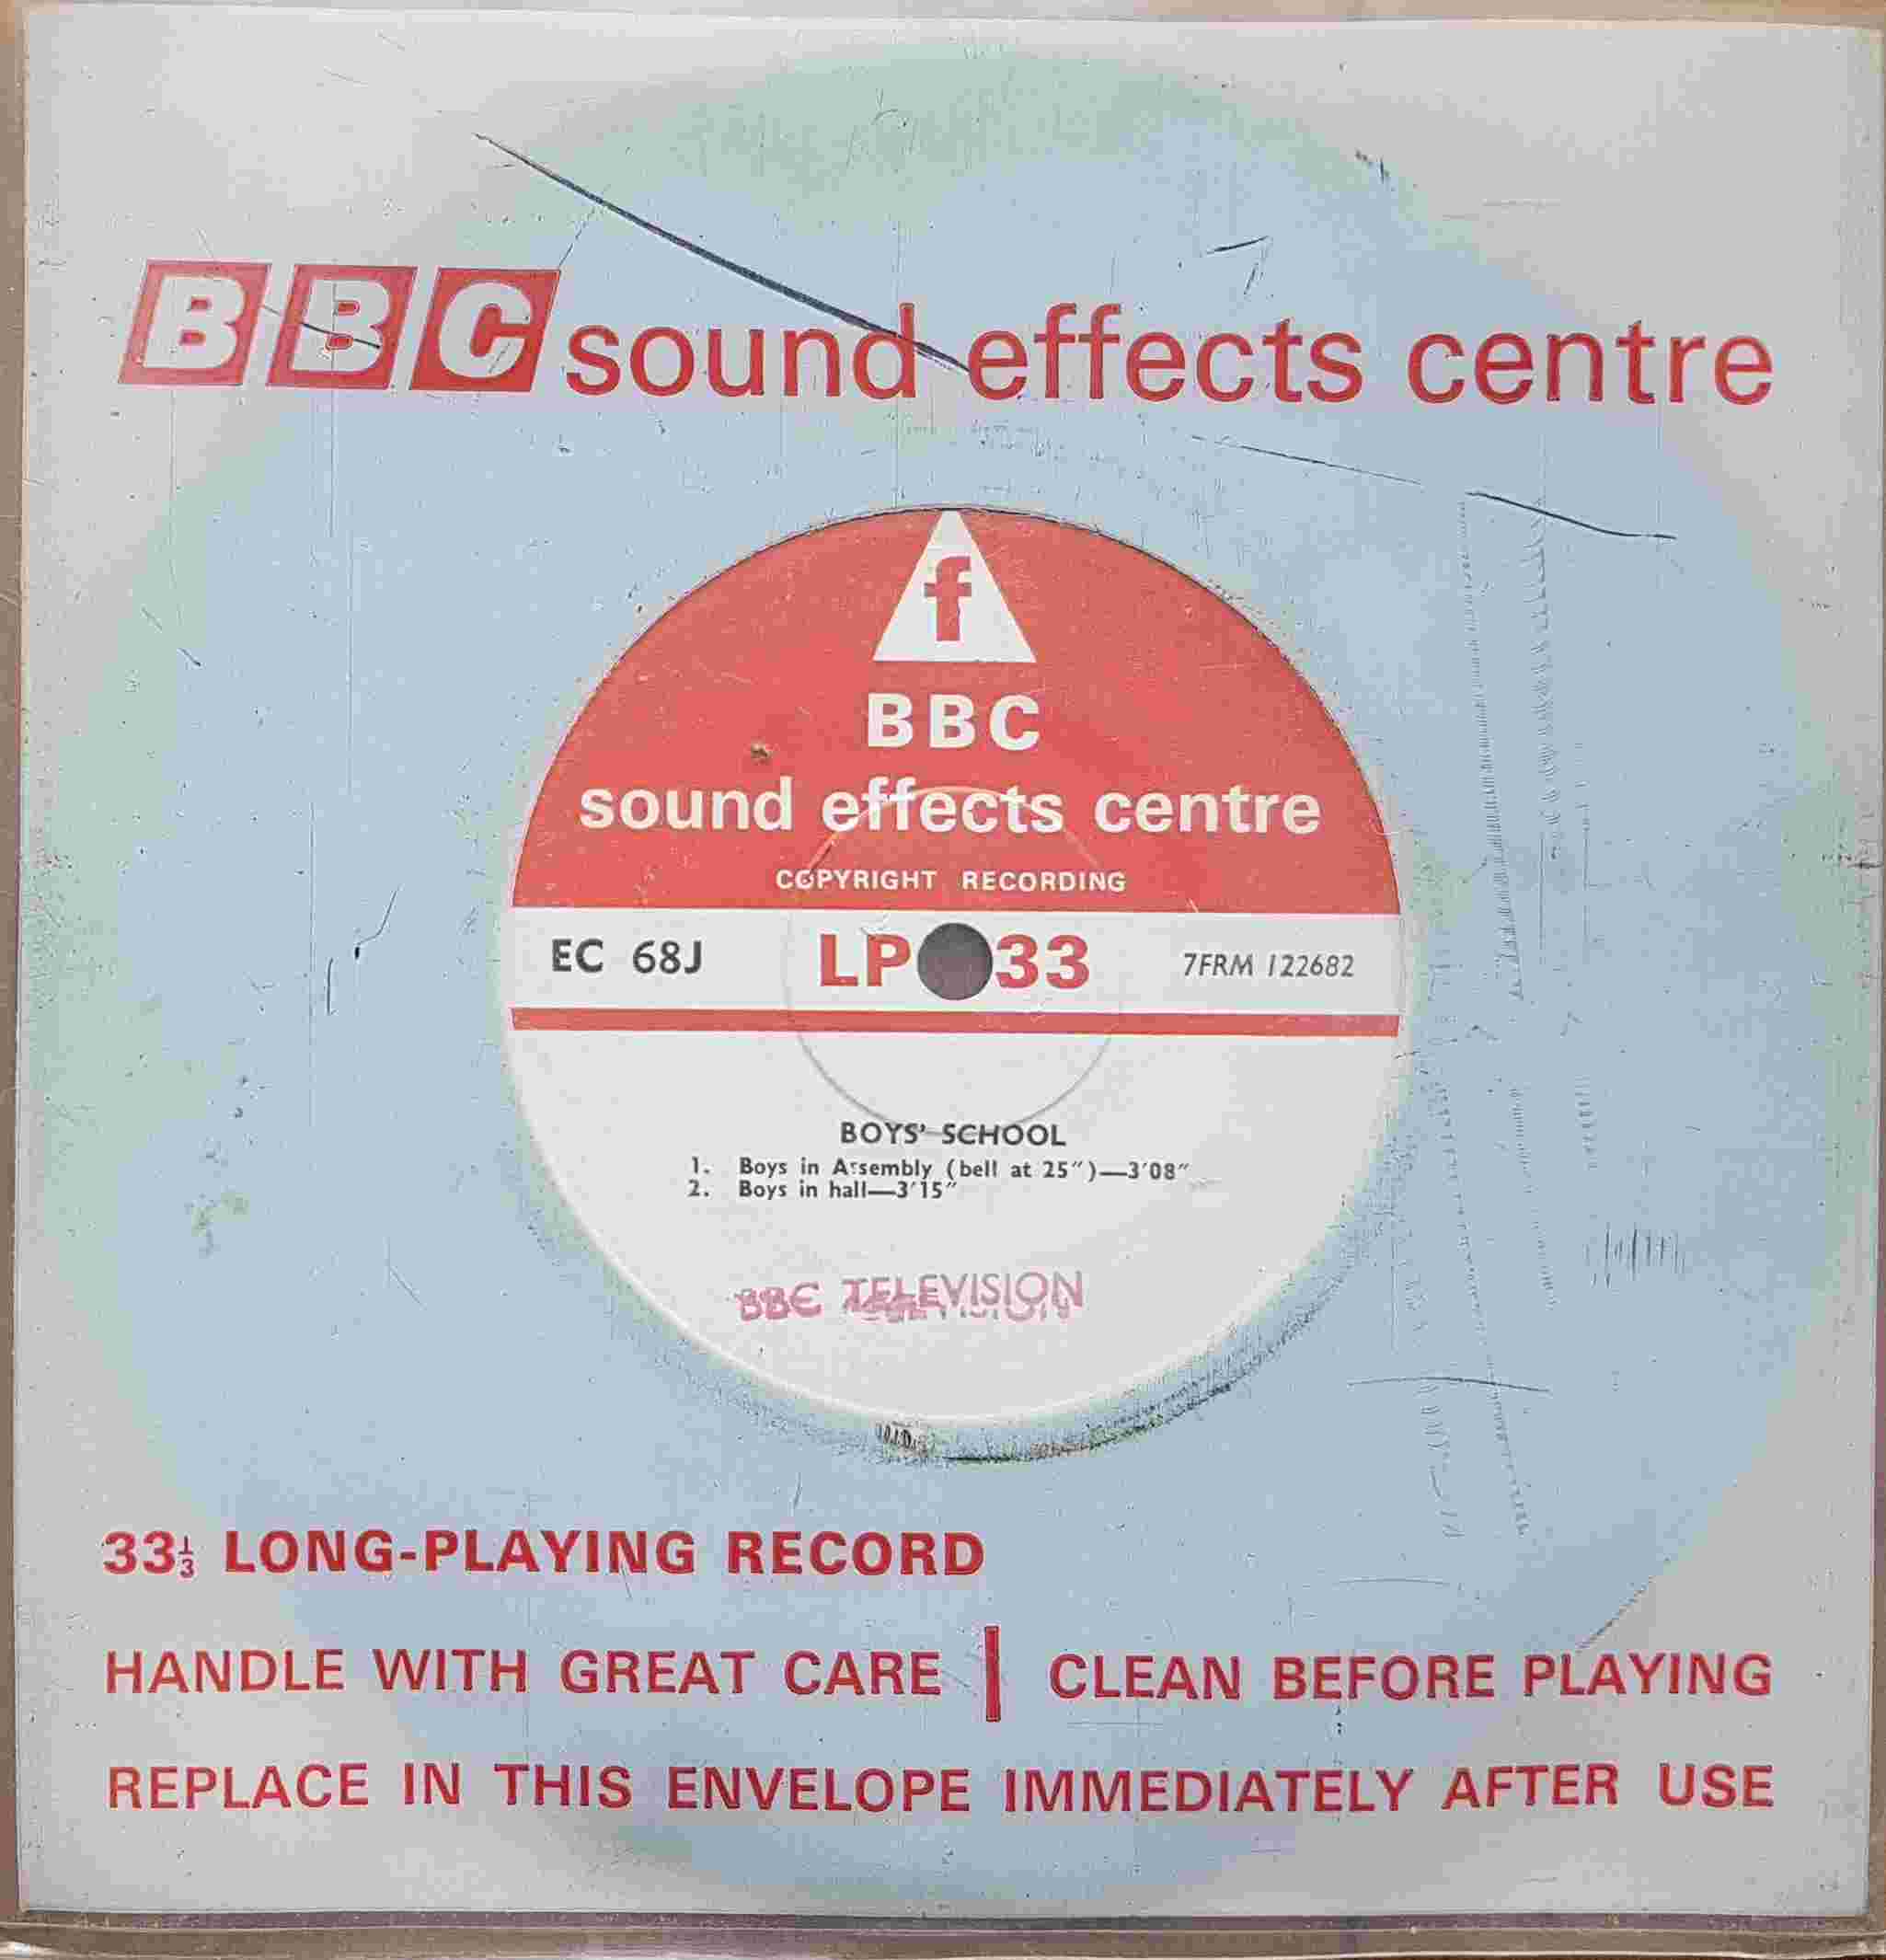 Picture of EC 68J Boy's school by artist Not registered from the BBC singles - Records and Tapes library